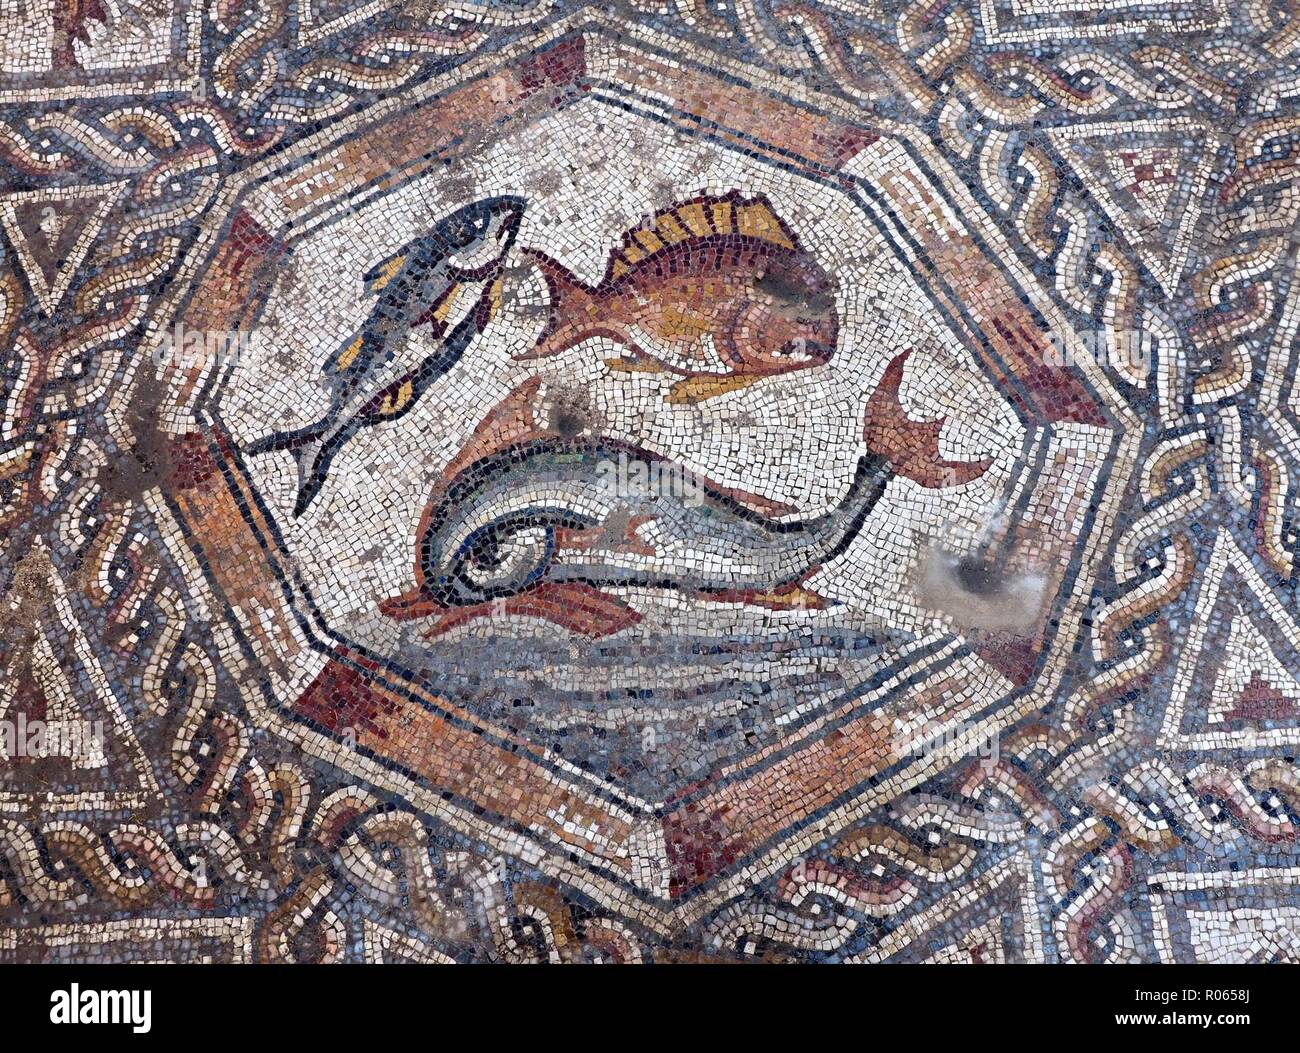 5792. The Lod Mosaic, a 3 rd. C. Roman mosaic from a Roman villa excavated  in the city of Lod near Tel-Aviv. Detail shows varrious fish Stock Photo -  Alamy